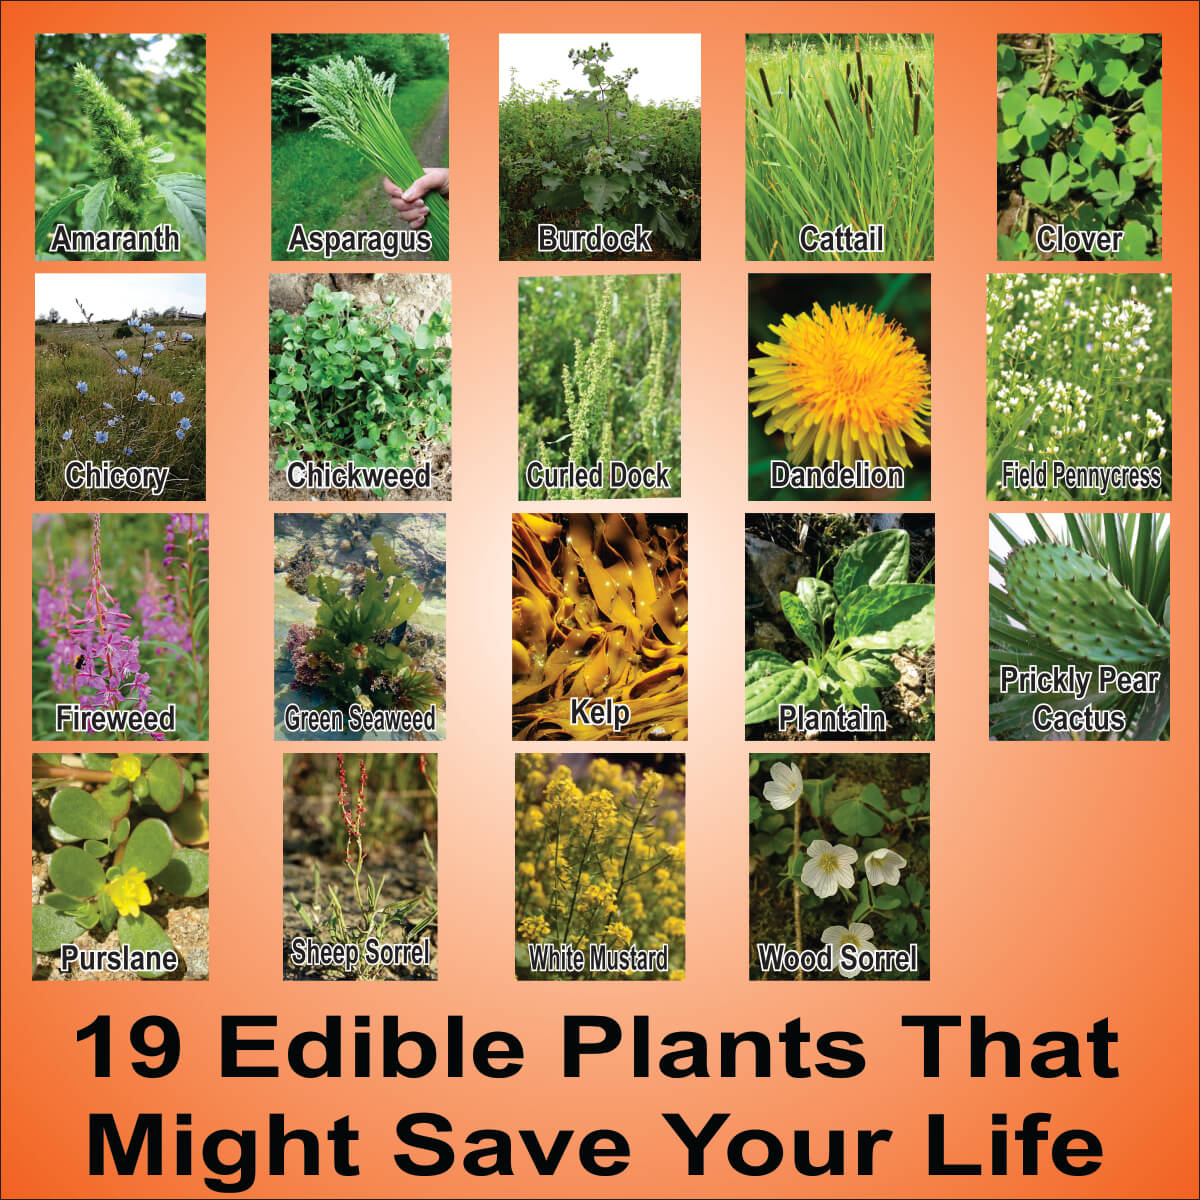 A Huge List of Edible Plants and Weeds for Survival OffGridHub